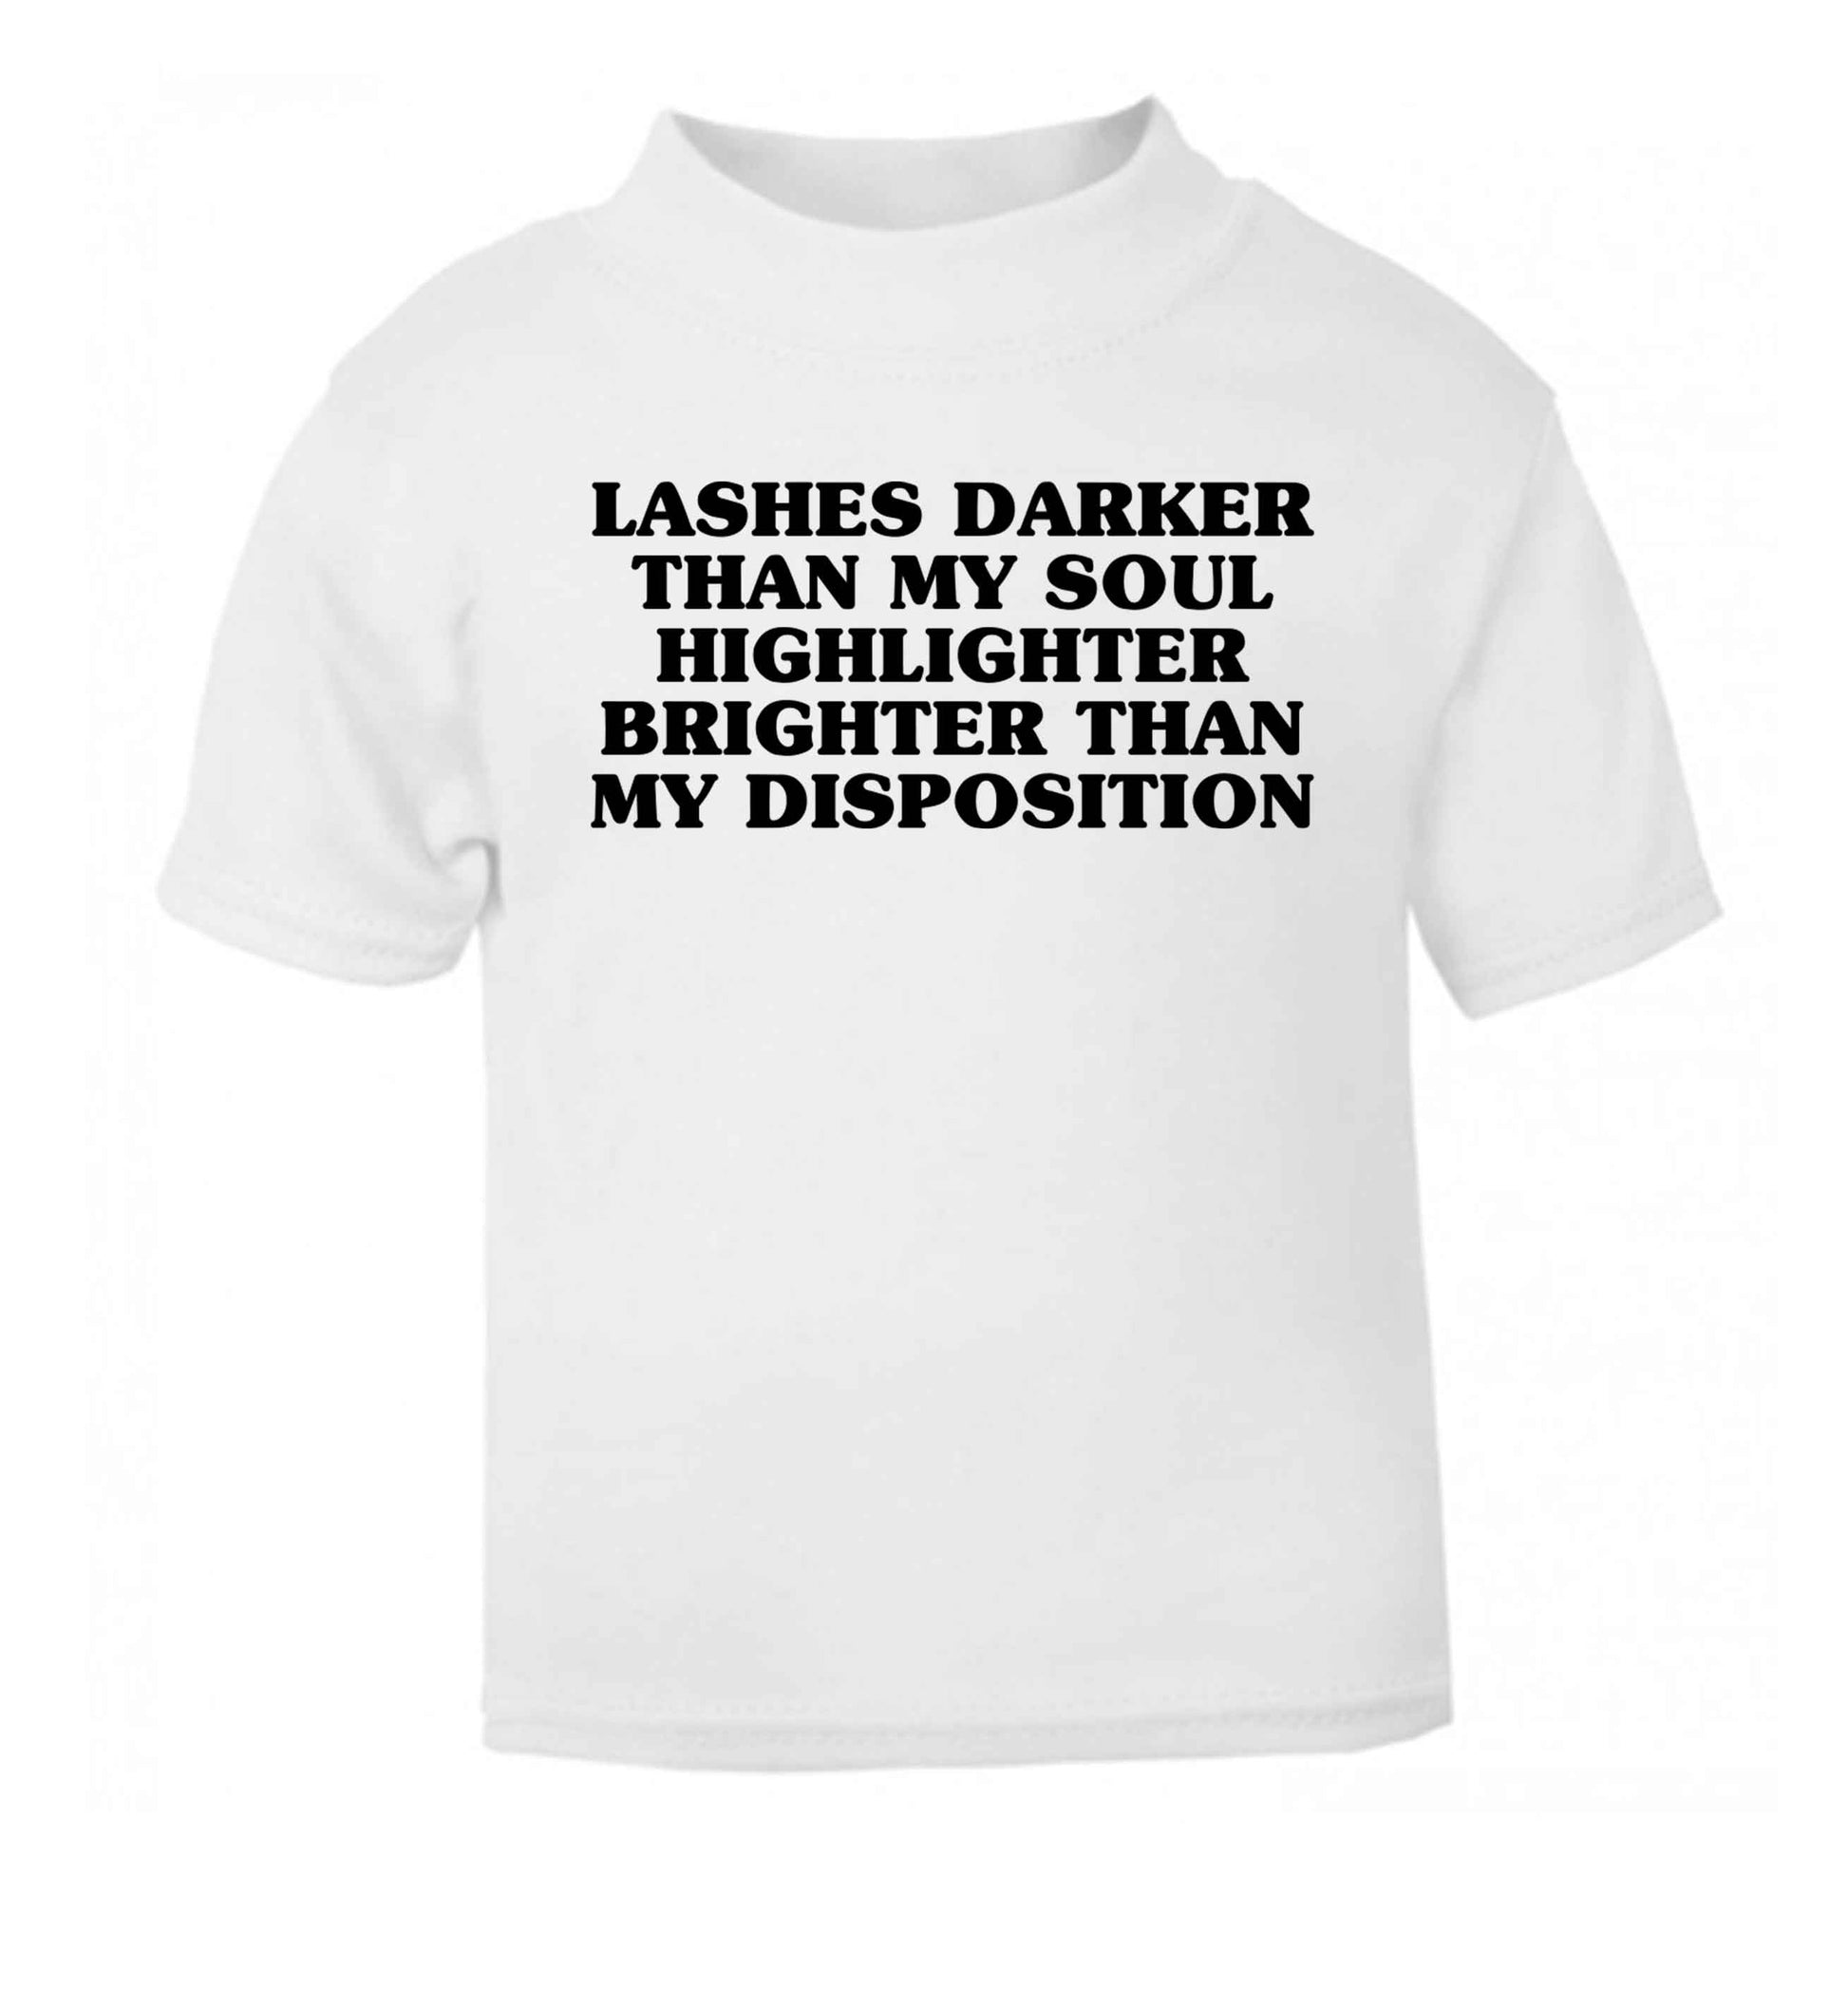 Lashes darker than my soul, highlighter brighter than my disposition white Baby Toddler Tshirt 2 Years